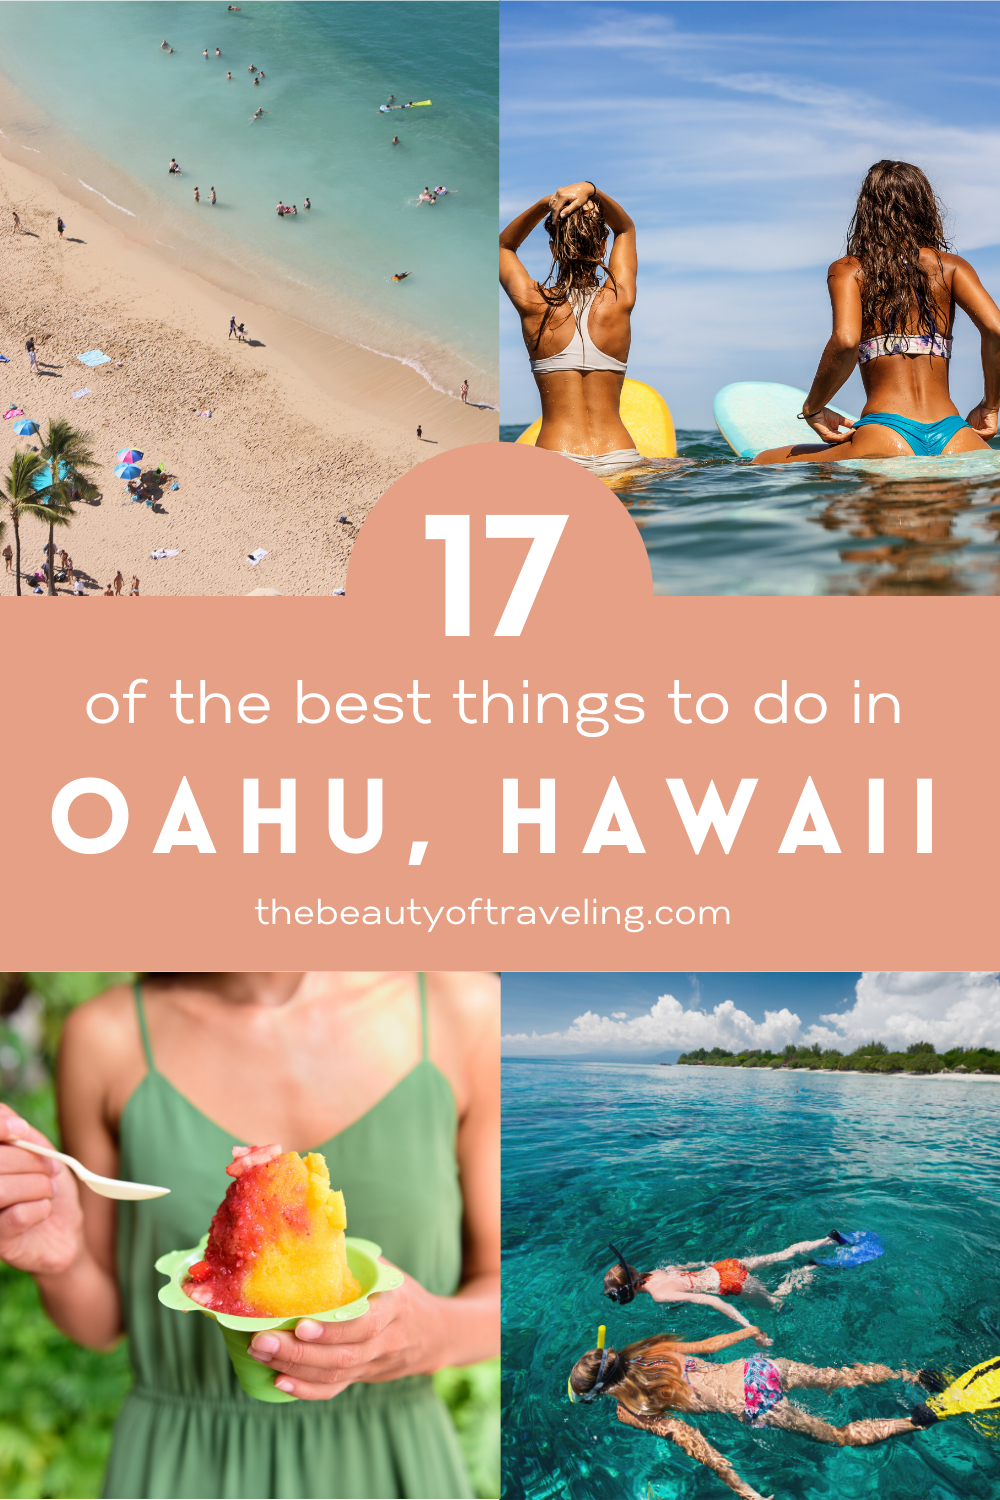 17 Best Things to Do While Vacationing in Oahu, Hawaii